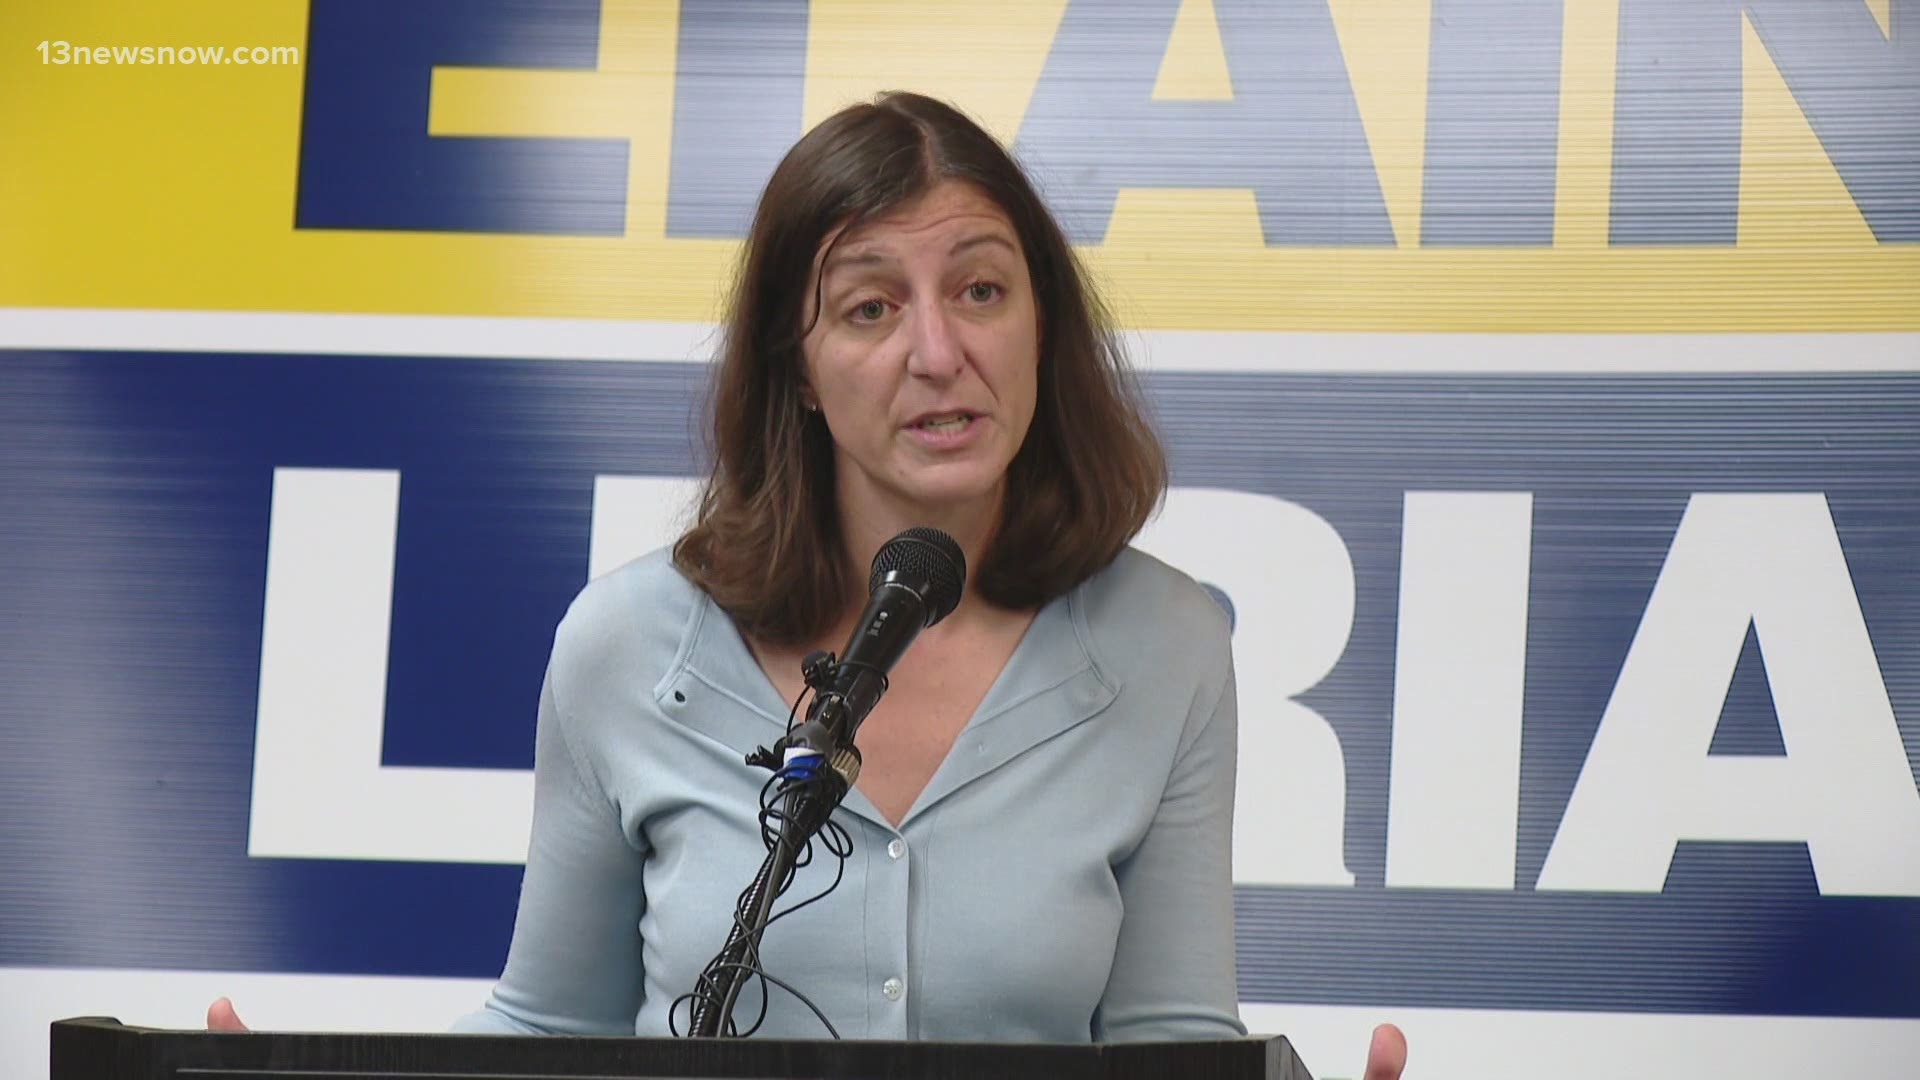 More than 12 hours after the polls closed, Rep. Elaine Luria was declared the winner. It's the second time she's defeated former Congressman Scott Taylor.